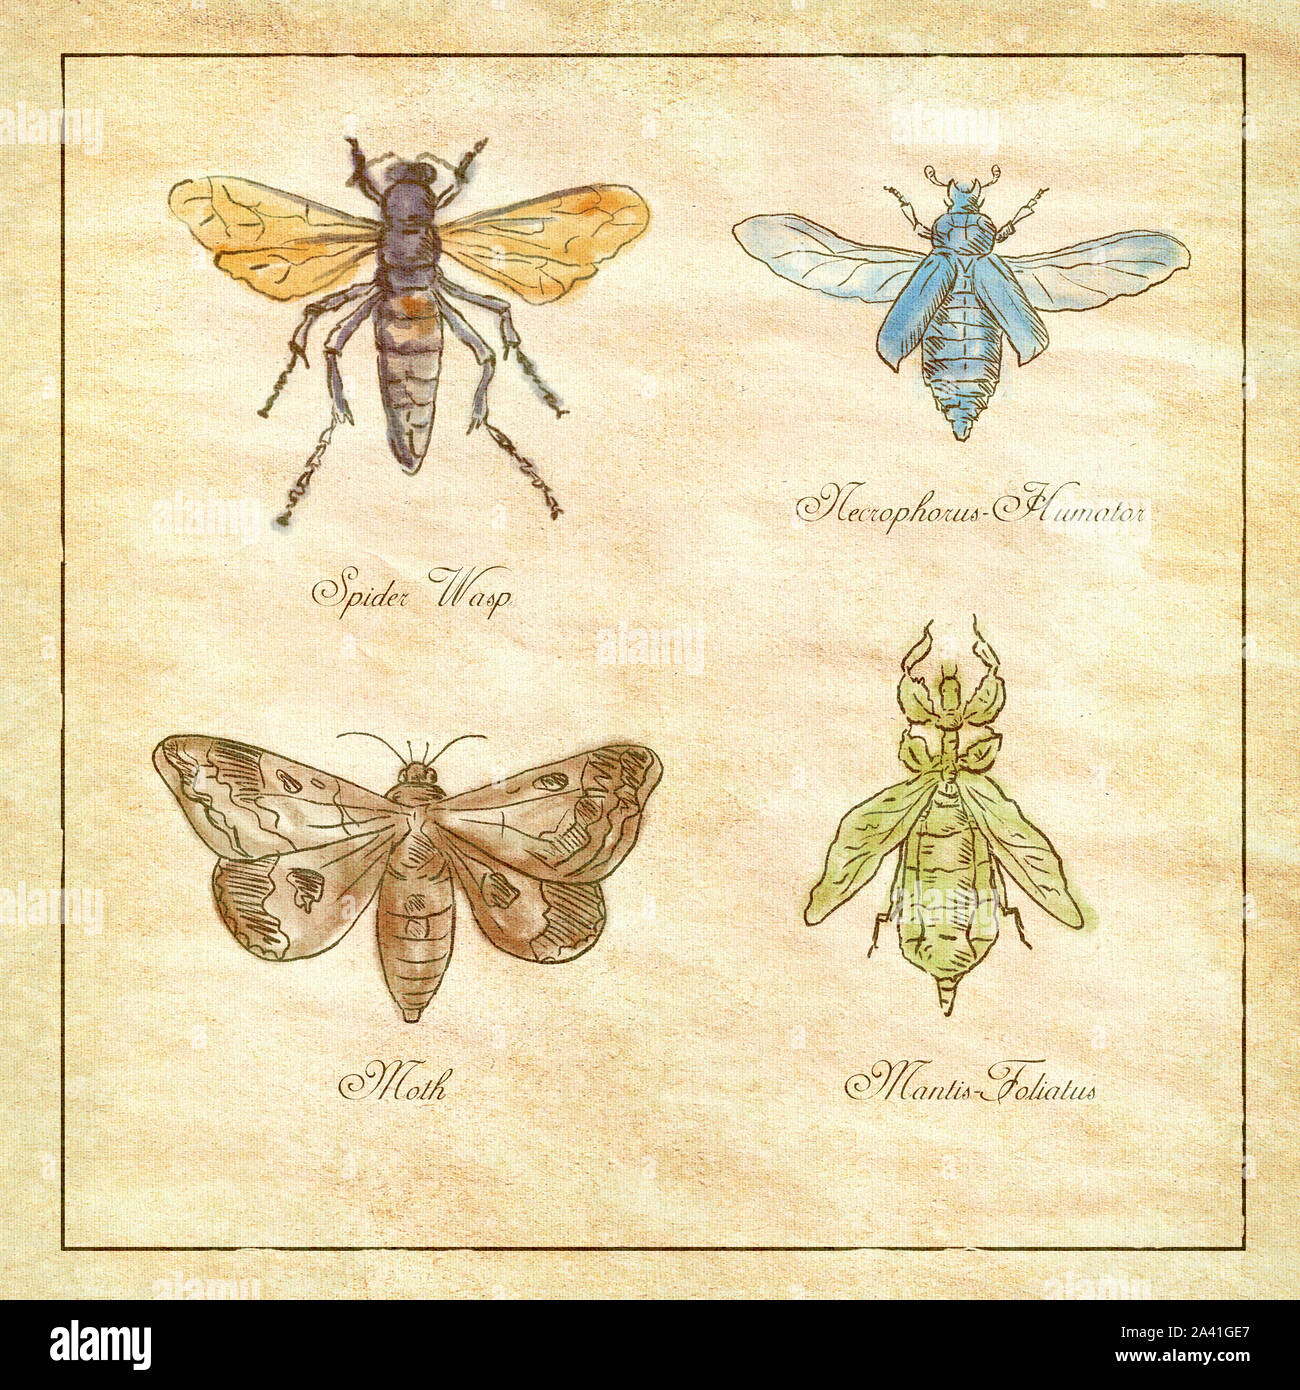 Vintage drawing illustration of a collection of insects like the Spider Wasp, Moth, Necrophorus Humator beetle, Mantis Foliatus on antique paper. Stock Photo